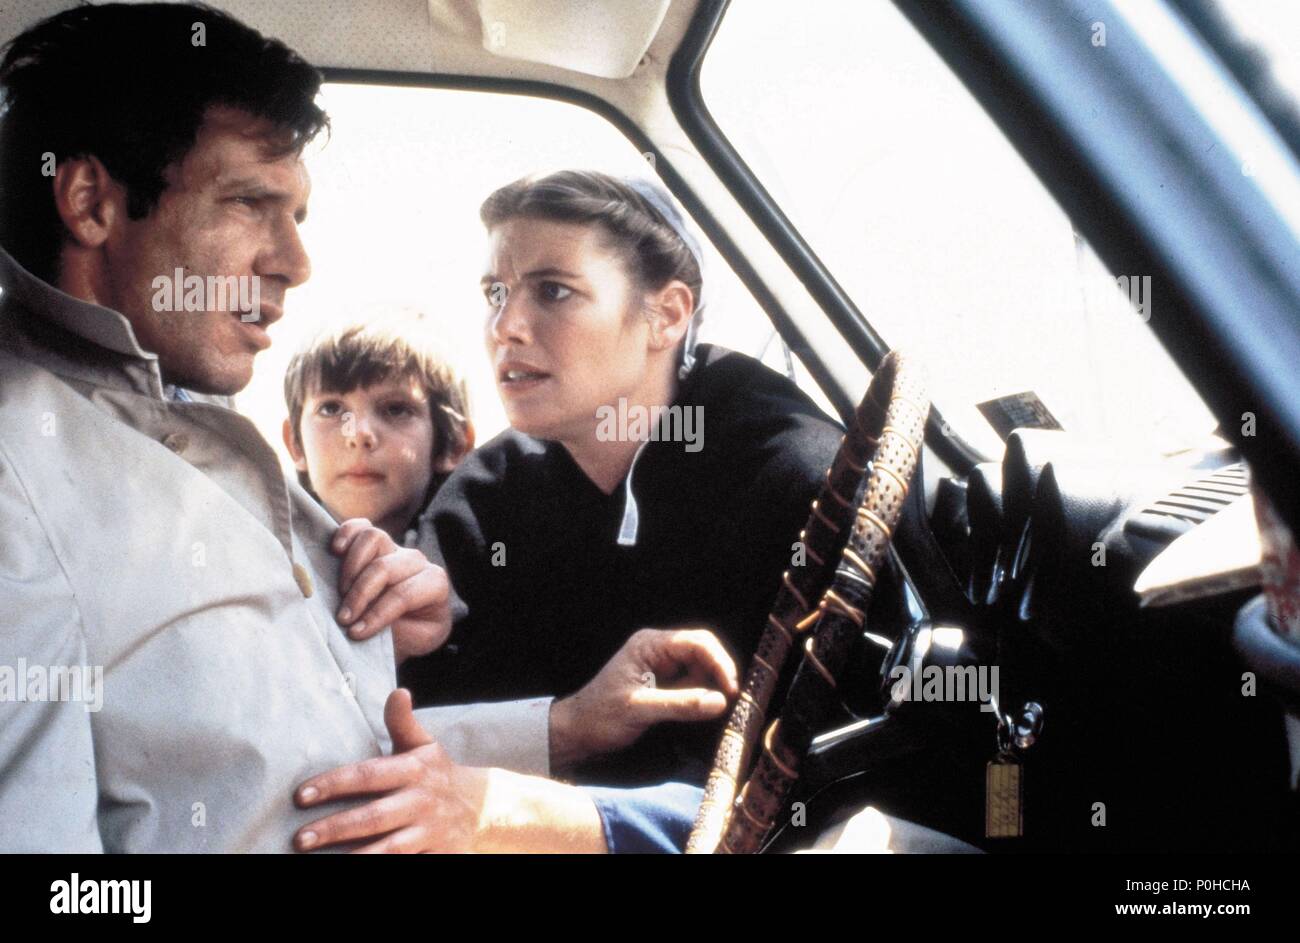 Original Film Title: WITNESS.  English Title: WITNESS.  Film Director: PETER WEIR.  Year: 1985.  Stars: KELLY MCGILLIS; HARRISON FORD; LUKAS HAAS. Credit: PARAMOUNT PICTURES / Album Stock Photo